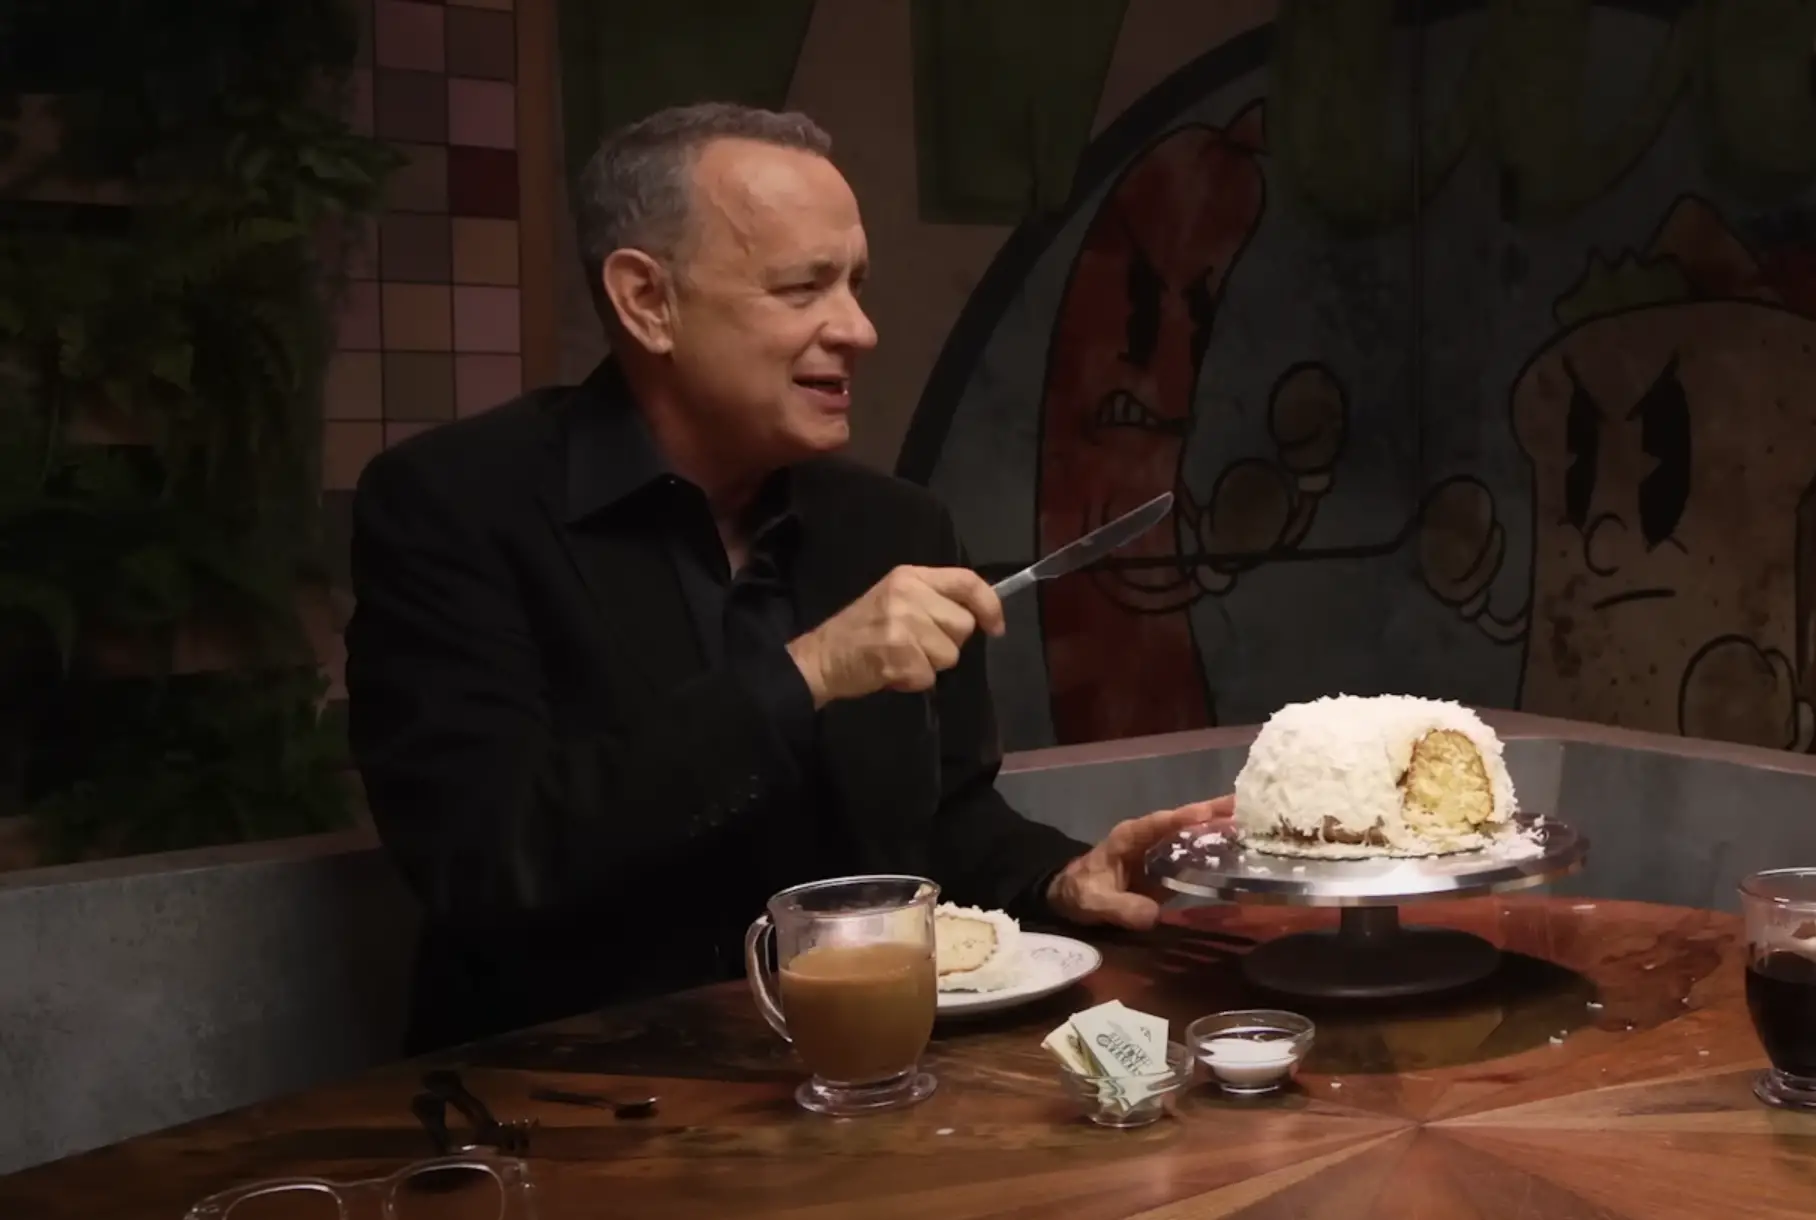 Tom Hanks showing off Doan's Bakery's Bunt cake which he receives as a Christmas gift from Tom Cruise. The cake was shown on Mythical Kitchen on January 19, 2023 | Source: YouTube/Mythical Kitchen